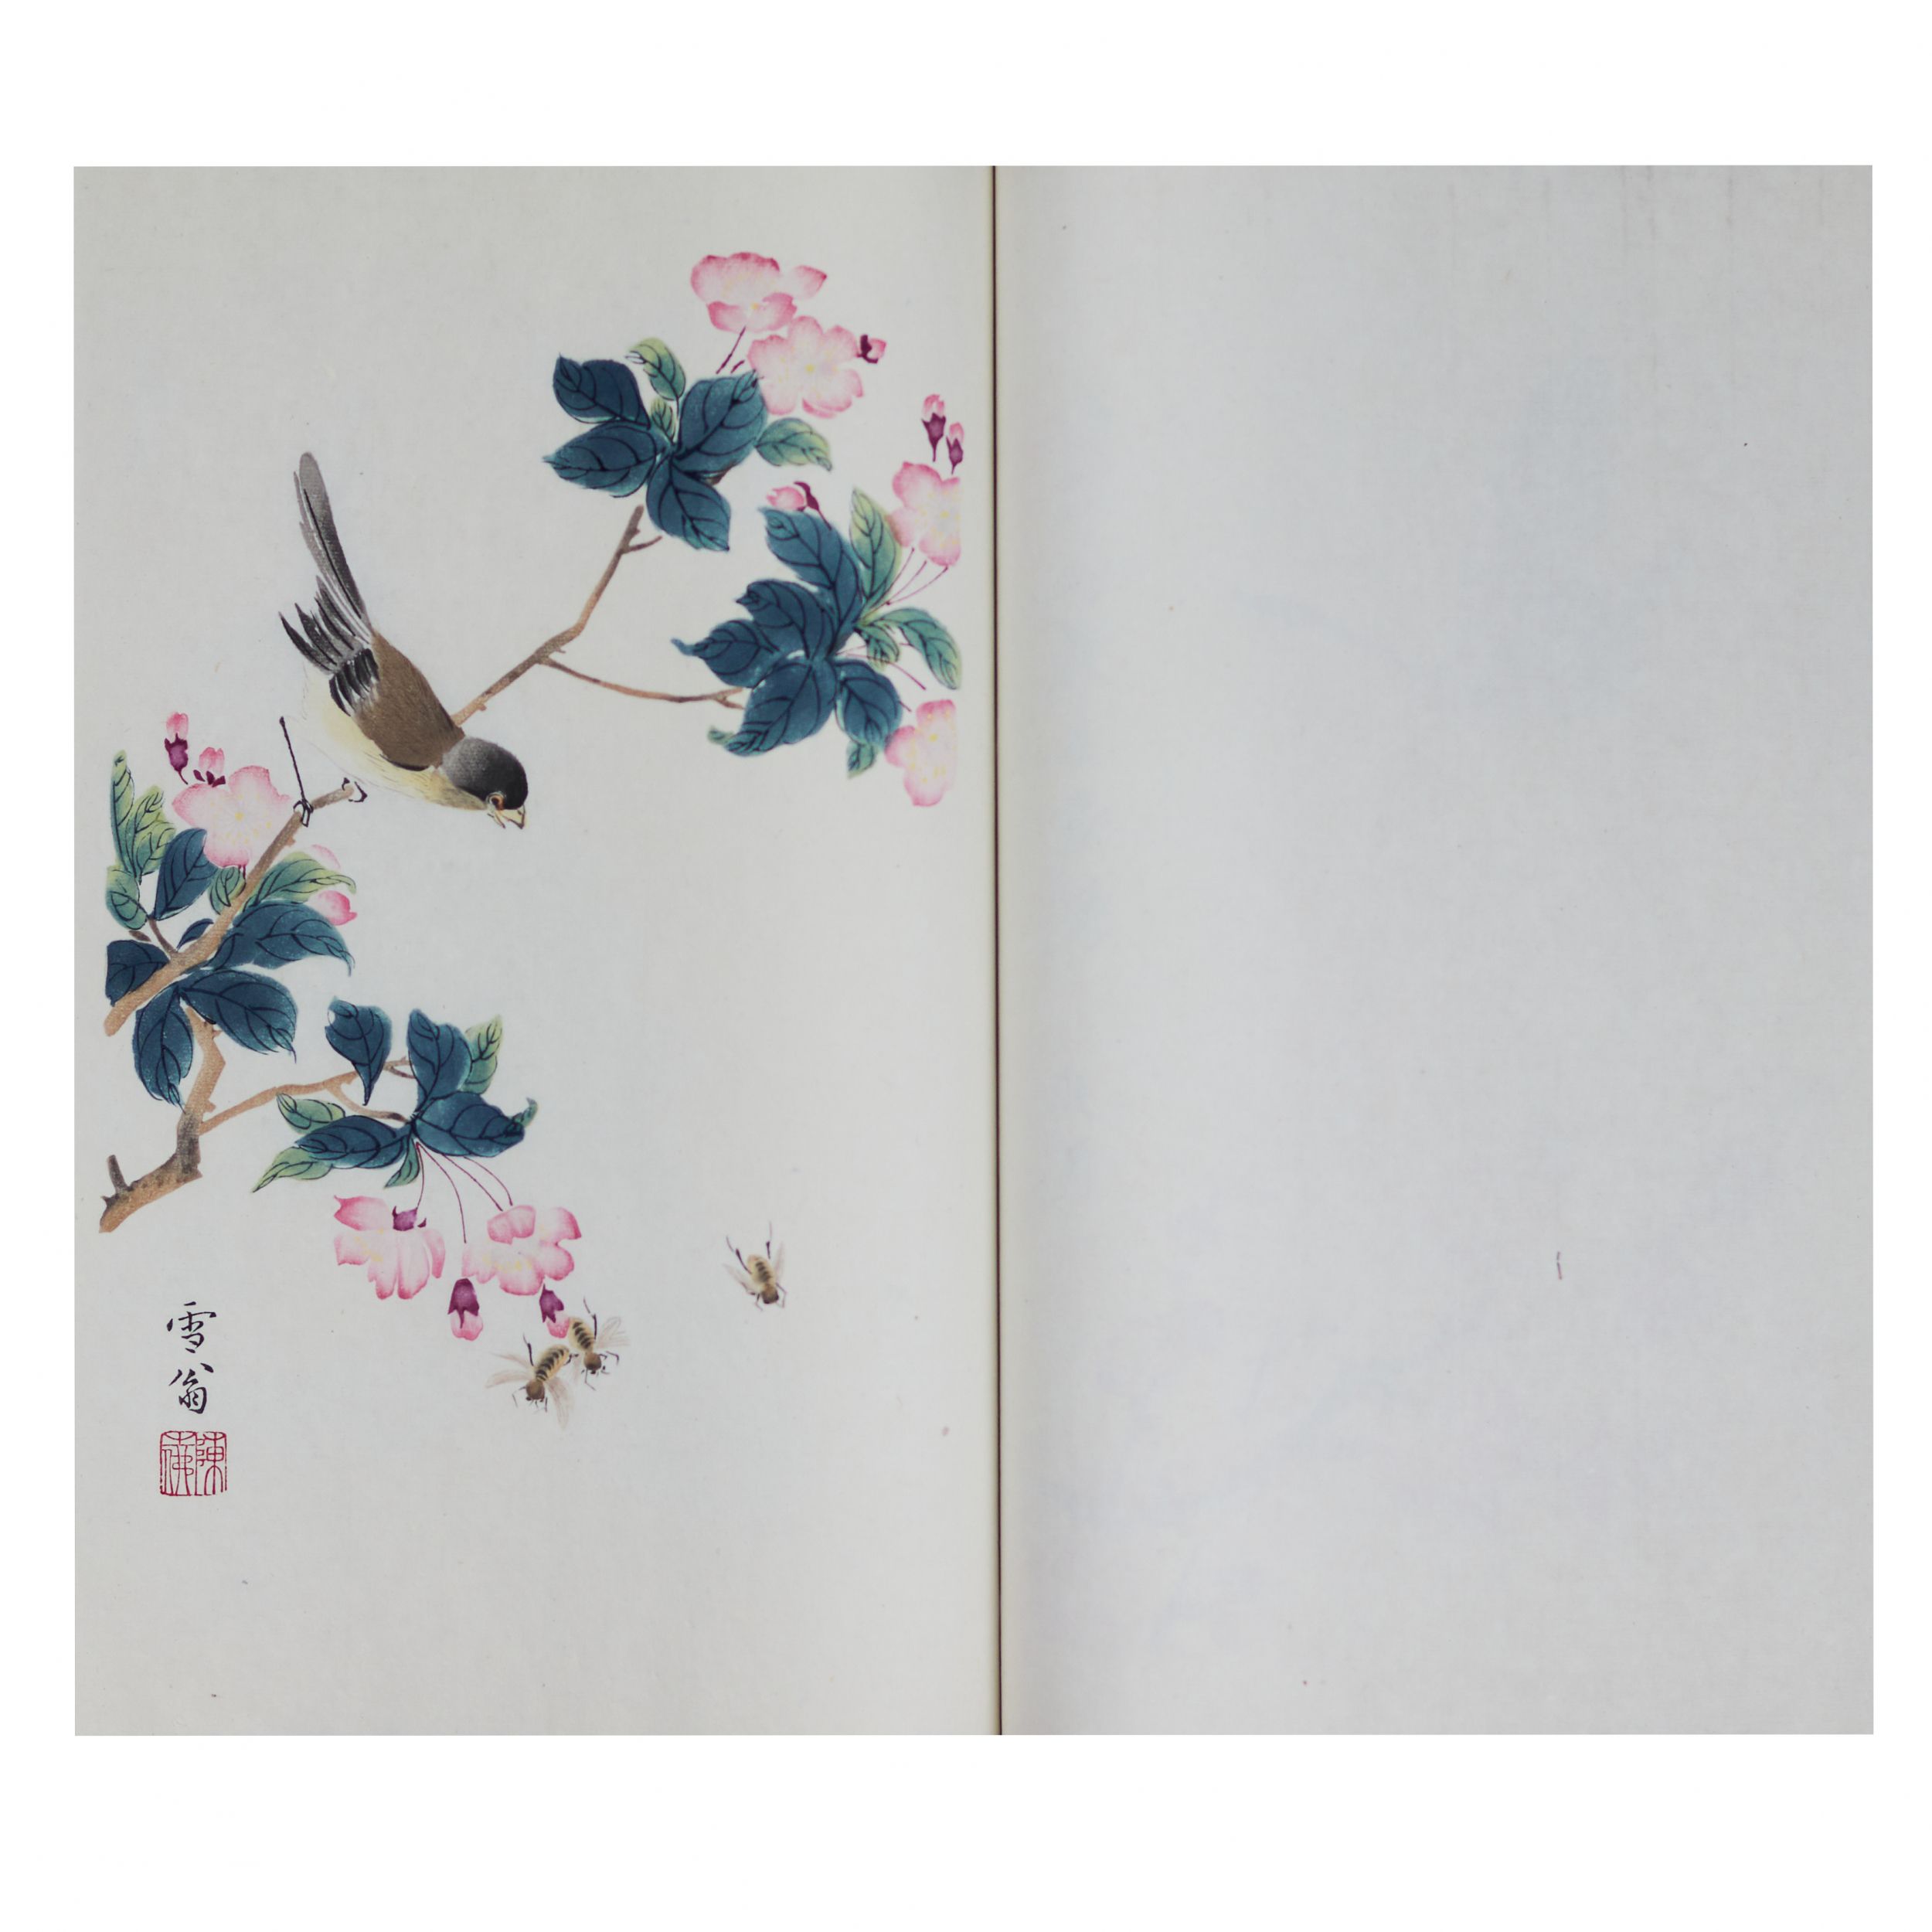 Collection of Chinese paintings by Guo-Hua, edited by Guo Mozhuo. China. 20th century. - Image 11 of 14